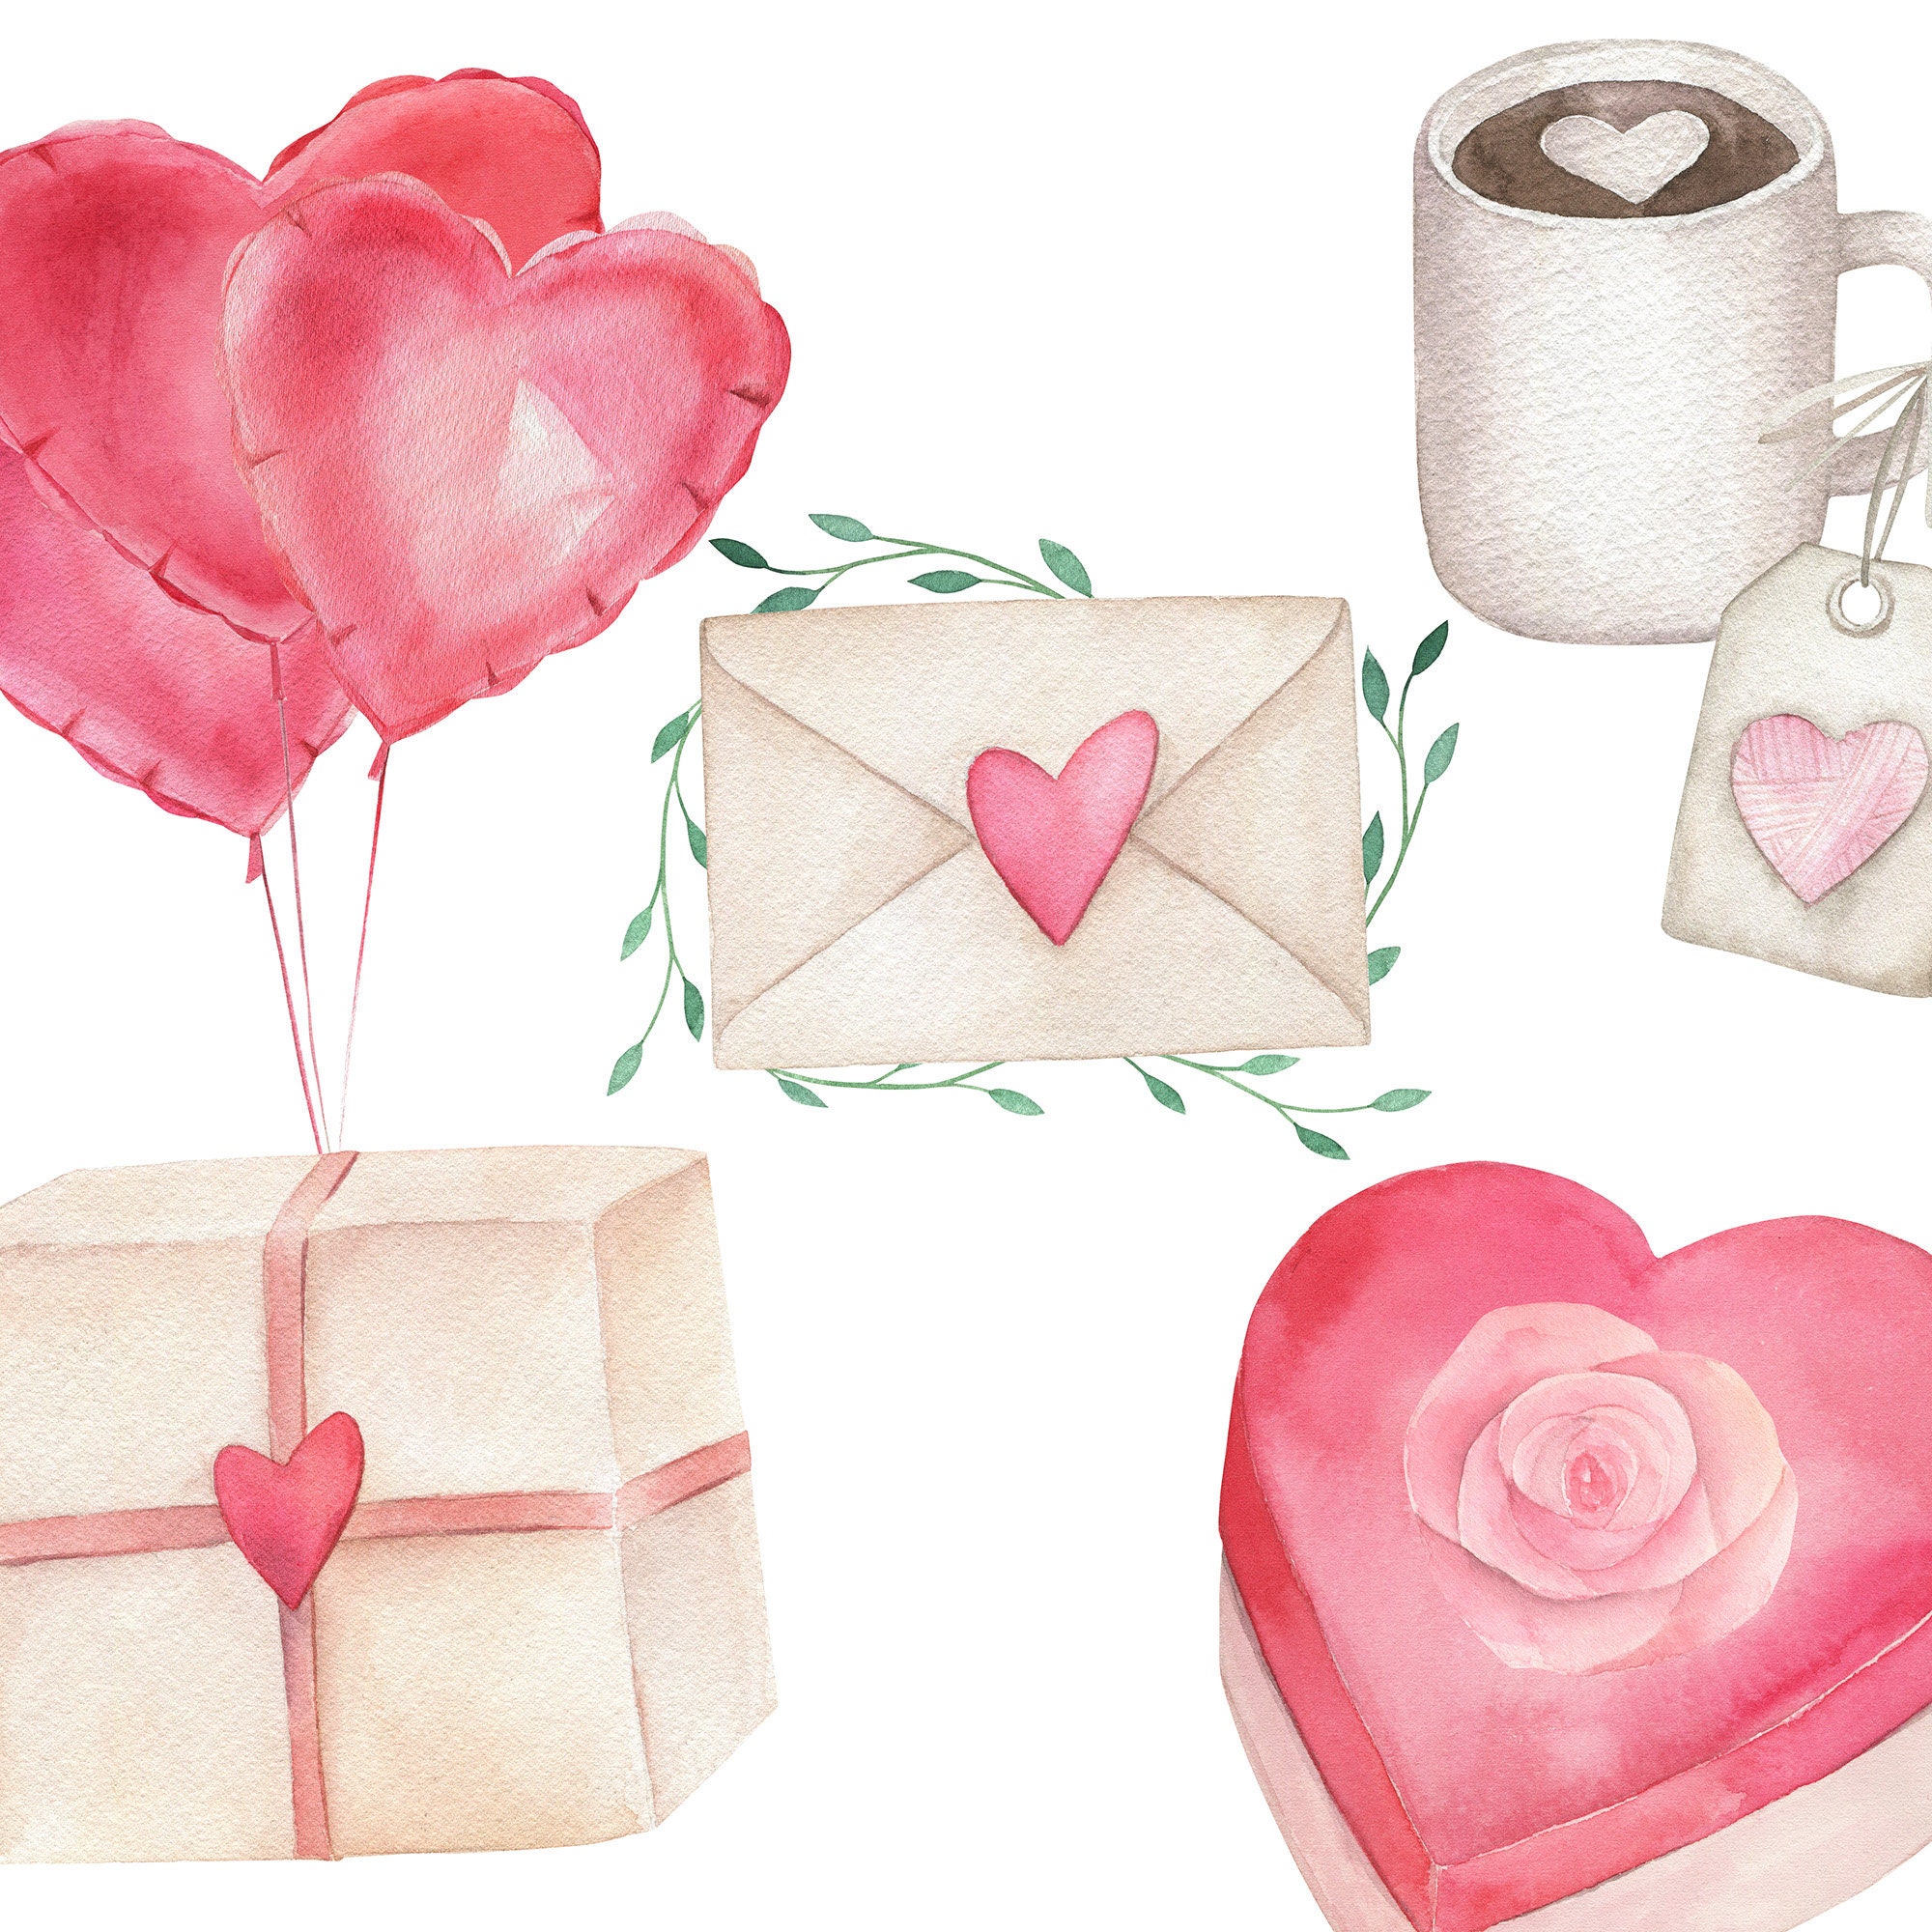 Watercolor Valentine's Day Clipart Set. Hearts, Ballons, Digital